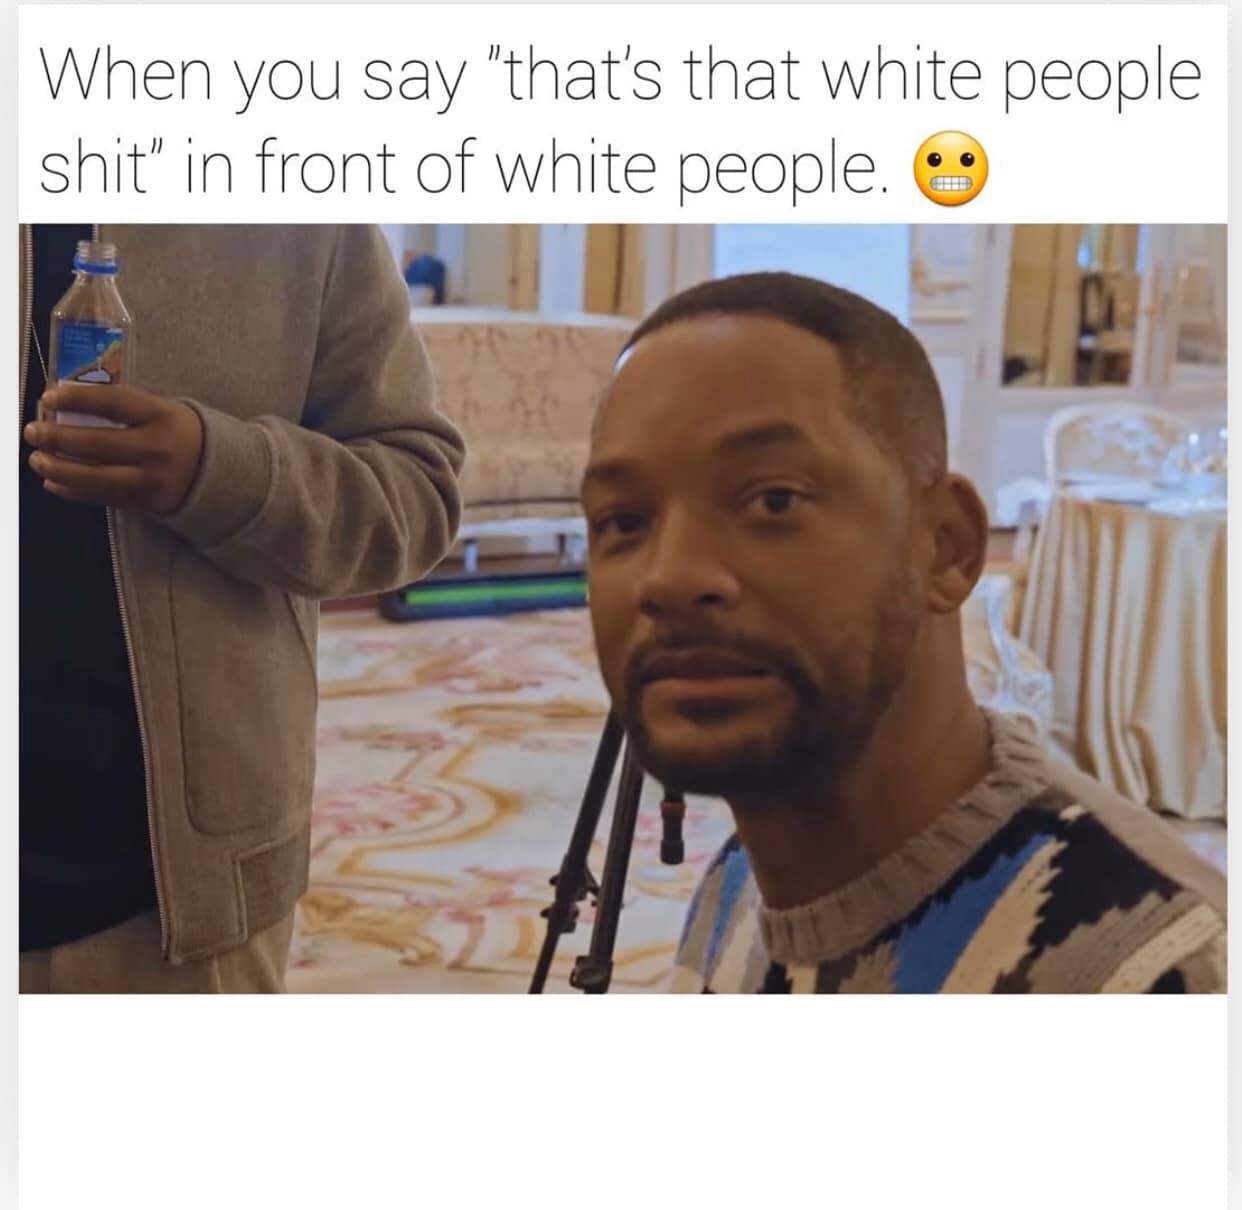 photo caption - When you say "that's that white people shit" in front of white people...